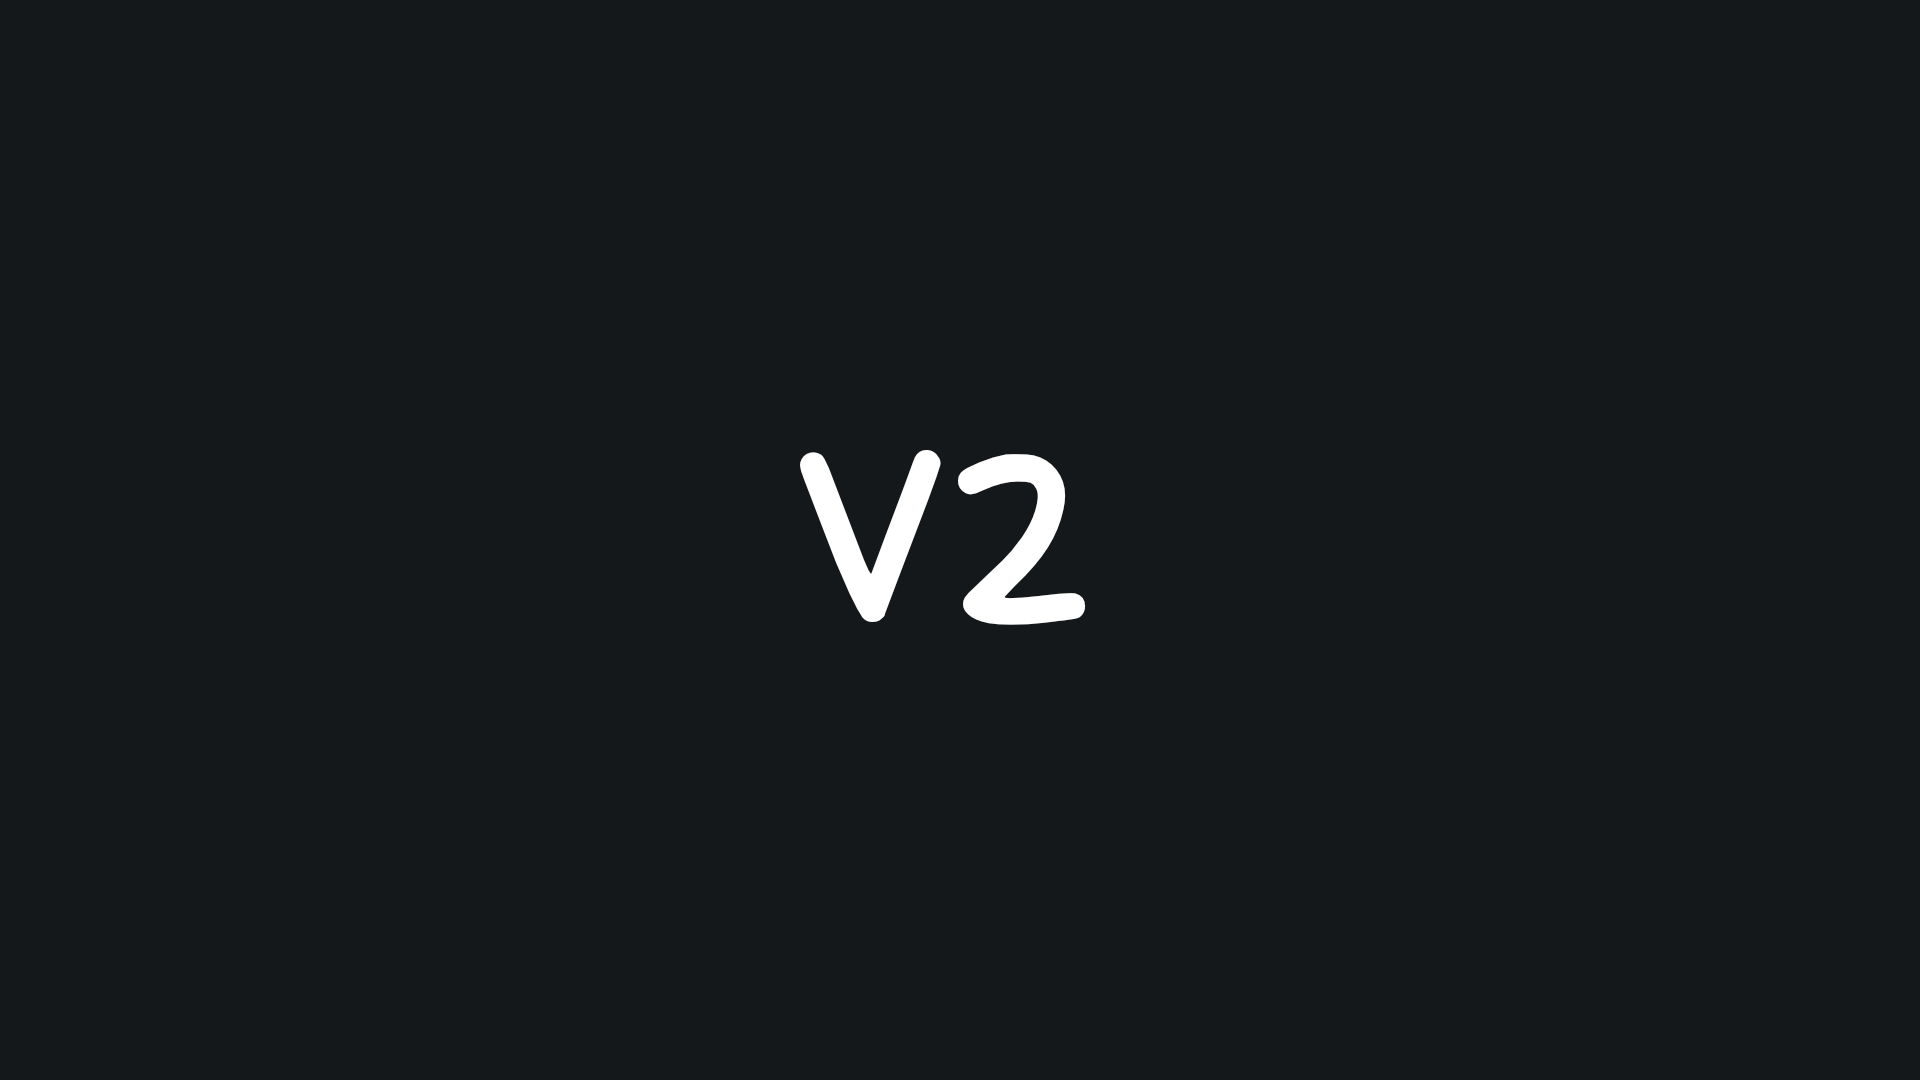 "V2" capitalized in the center in a black background.